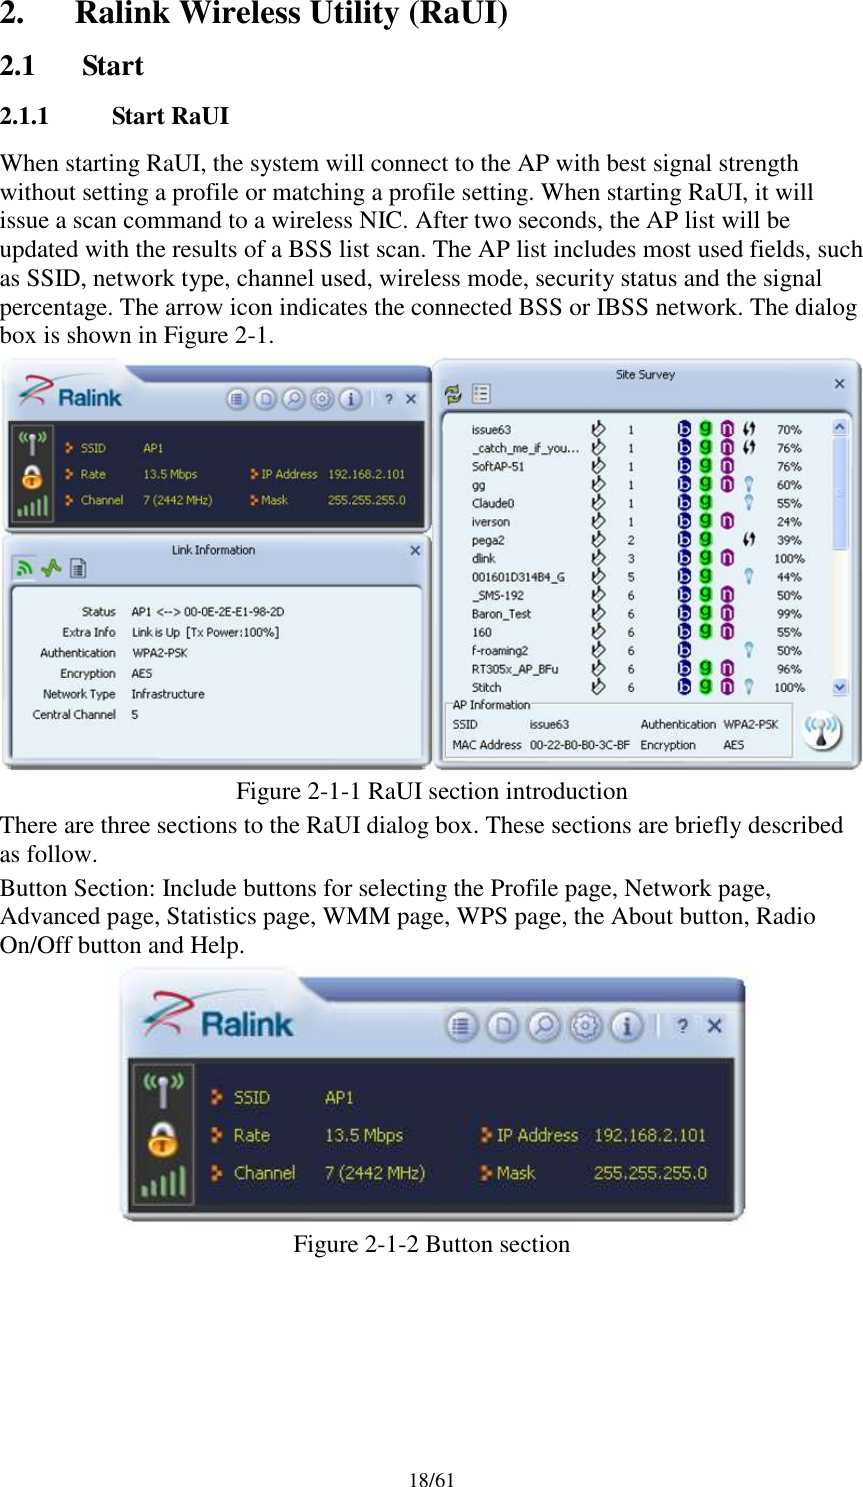 18/612. Ralink Wireless Utility (RaUI)2.1 Start2.1.1 Start RaUIWhen starting RaUI, the system will connect to the AP with best signal strengthwithout setting a profile or matching a profile setting. When starting RaUI, it willissue a scan command to a wireless NIC. After two seconds, the AP list will beupdated with the results of a BSS list scan. The AP list includes most used fields, suchas SSID, network type, channel used, wireless mode, security status and the signalpercentage. The arrow icon indicates the connected BSS or IBSS network. The dialogbox is shown in Figure 2-1.Figure 2-1-1 RaUI section introductionThere are three sections to the RaUI dialog box. These sections are briefly describedas follow.Button Section: Include buttons for selecting the Profile page, Network page,Advanced page, Statistics page, WMM page, WPS page, the About button, RadioOn/Off button and Help.Figure 2-1-2 Button section